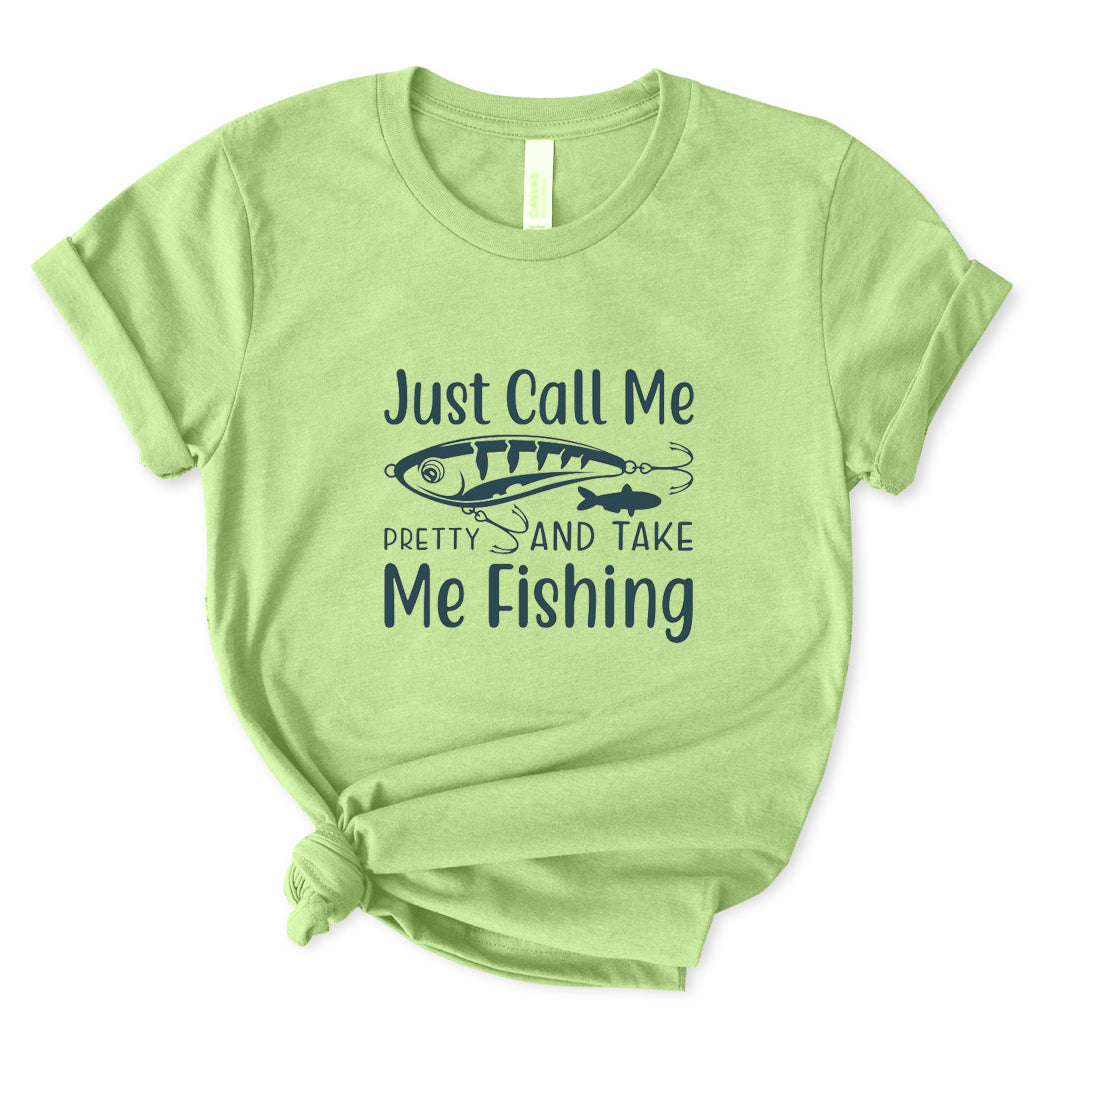 Just Call Me Pretty And Take Me Fishing T-Shirt for Women